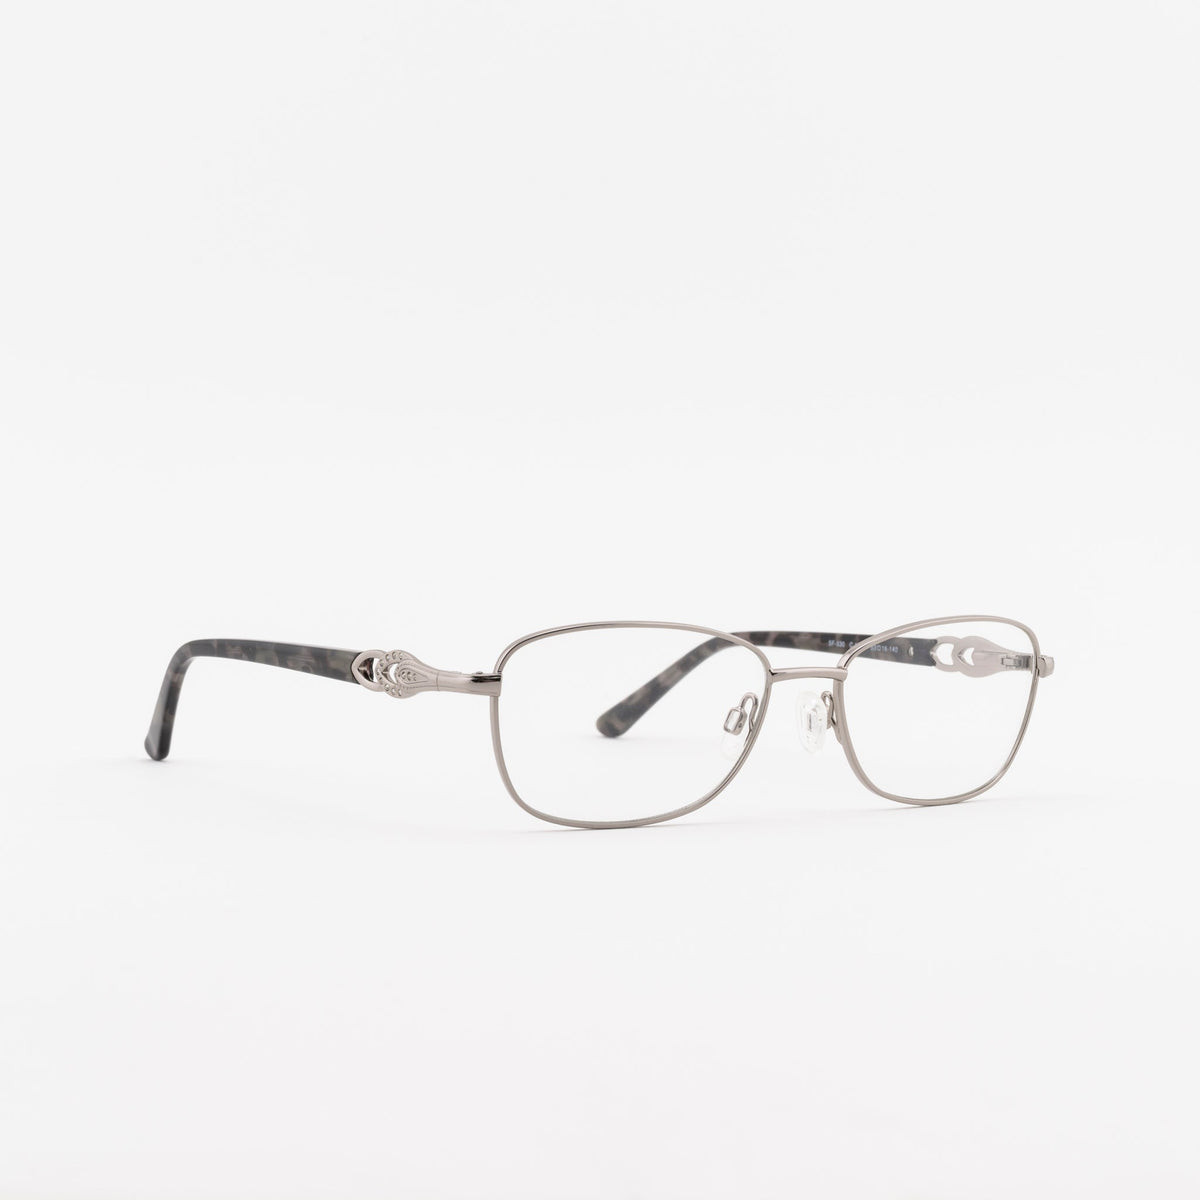 SF-530 Frames Superflex 53 C1 - SILVER BLACK Not Available